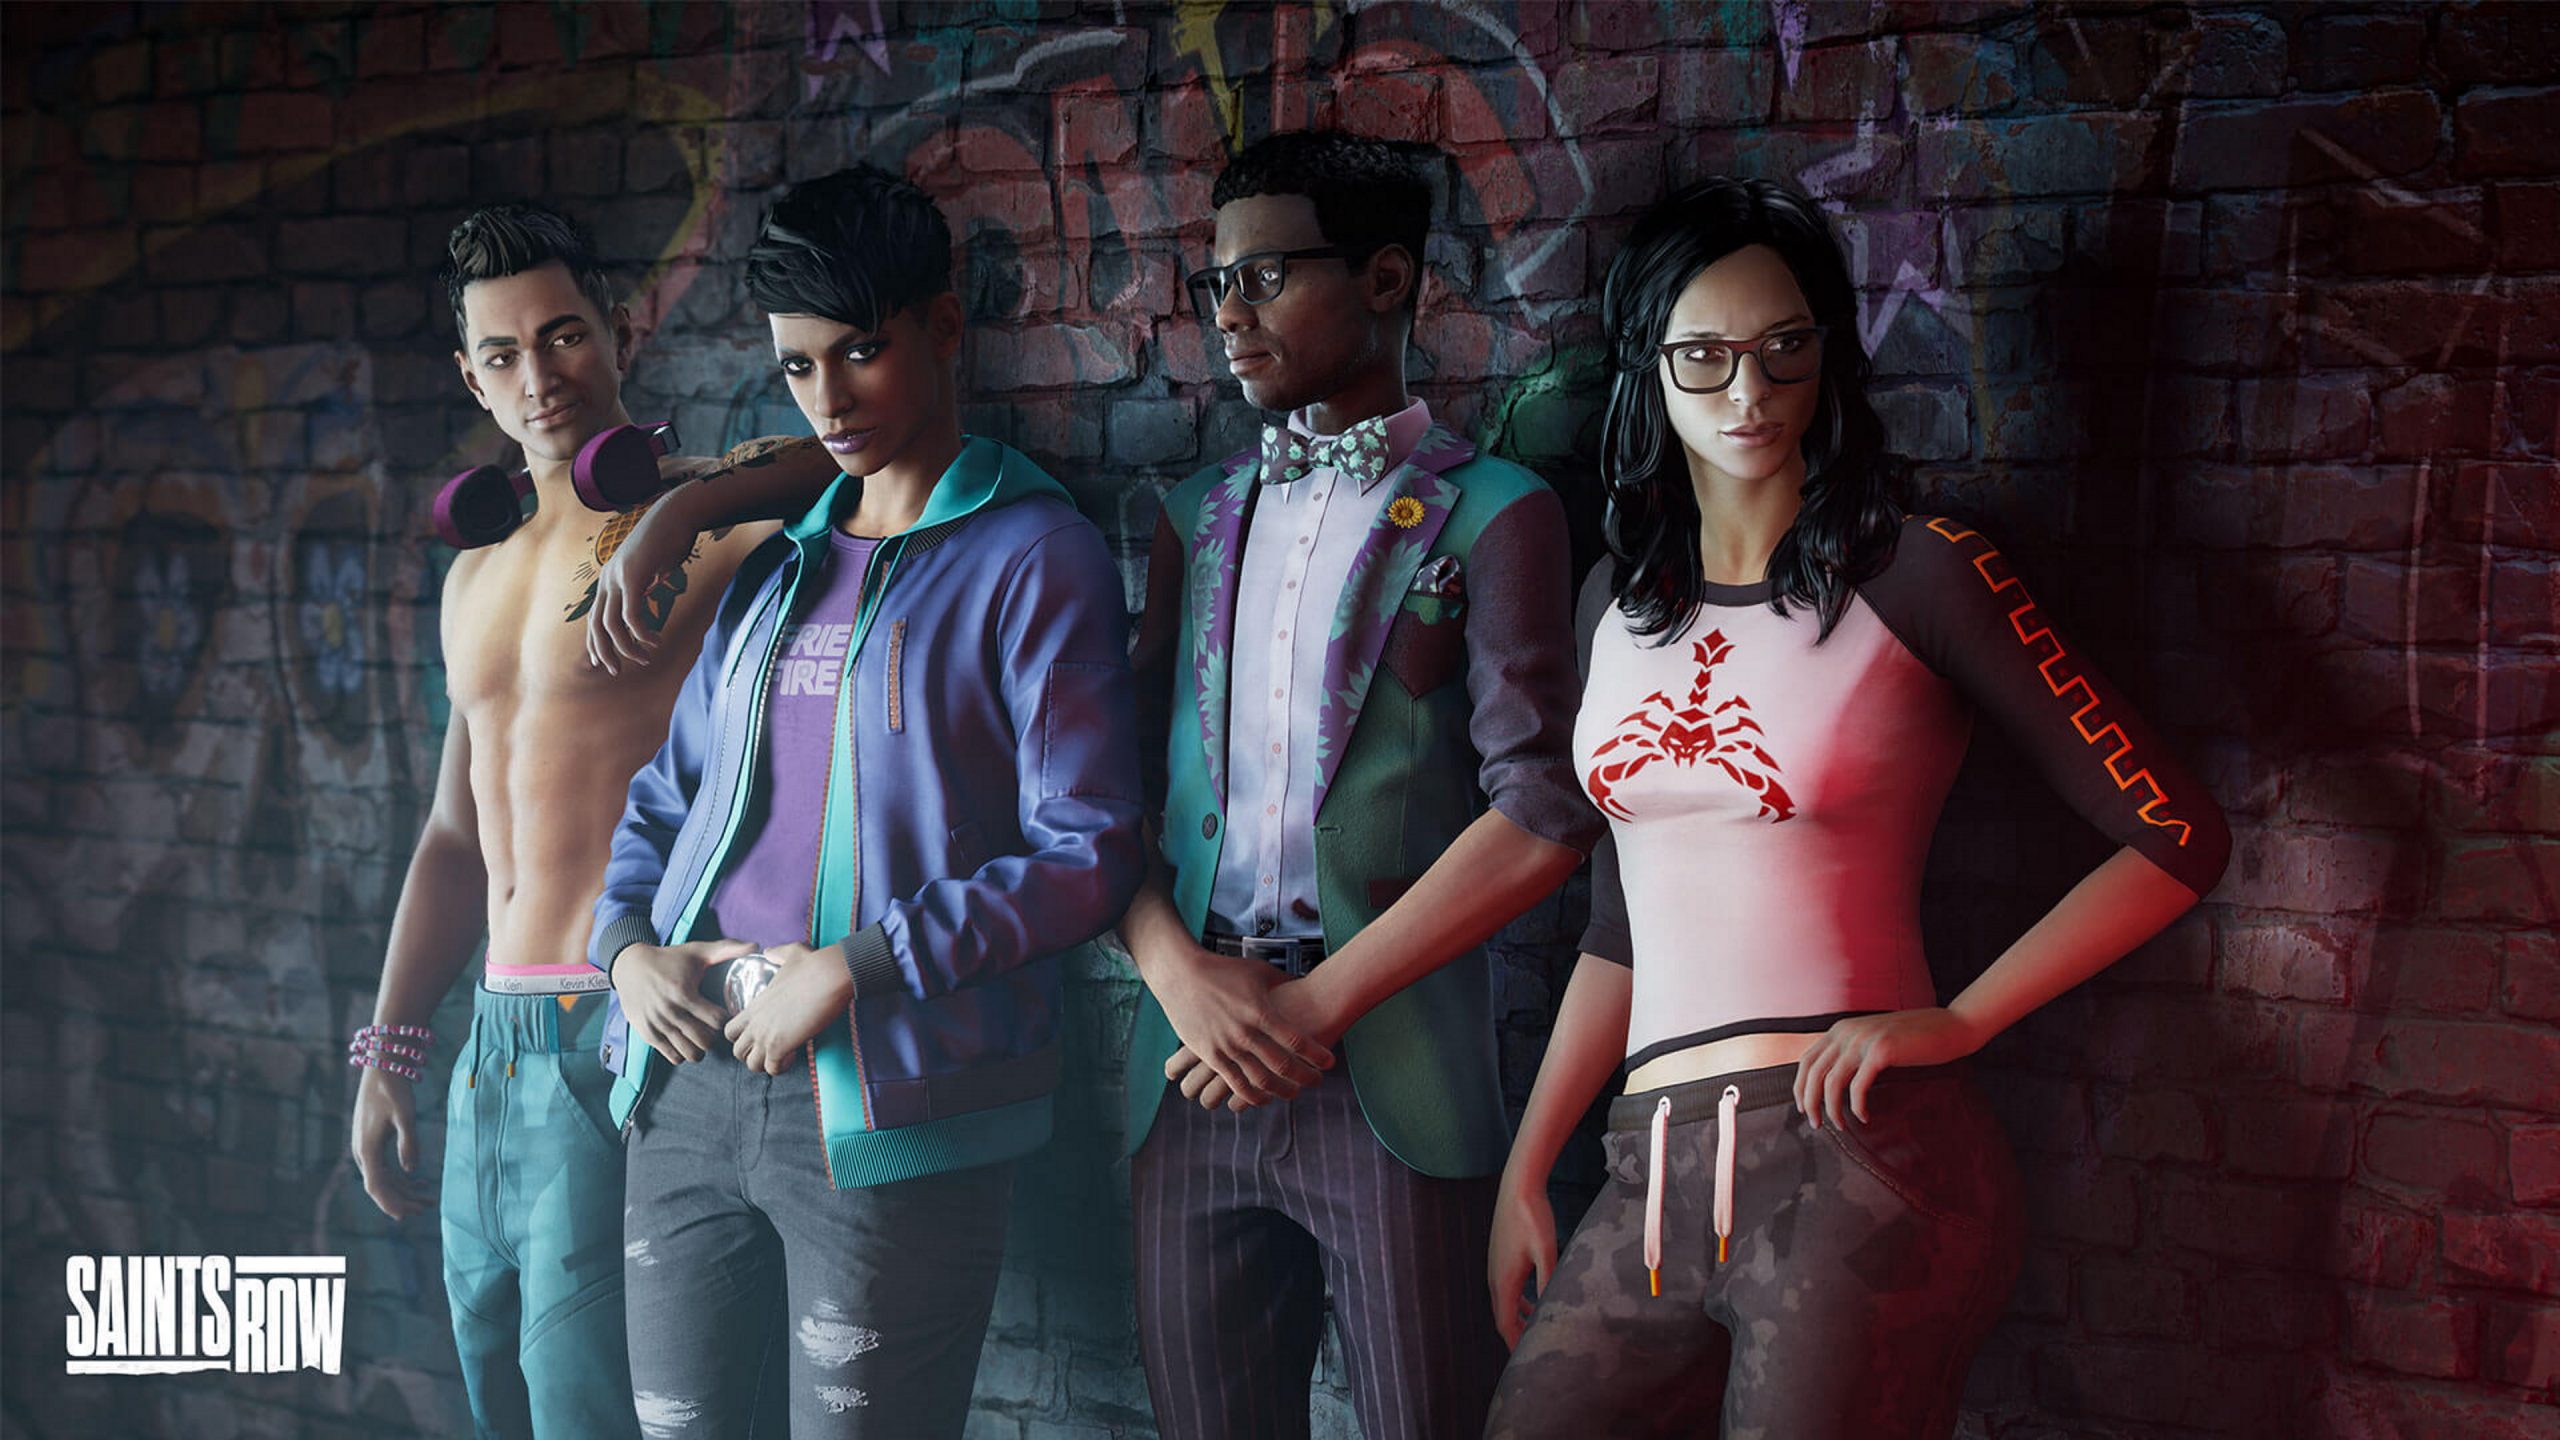 Saints Row developer is being shifted to Gearbox following tepid launch